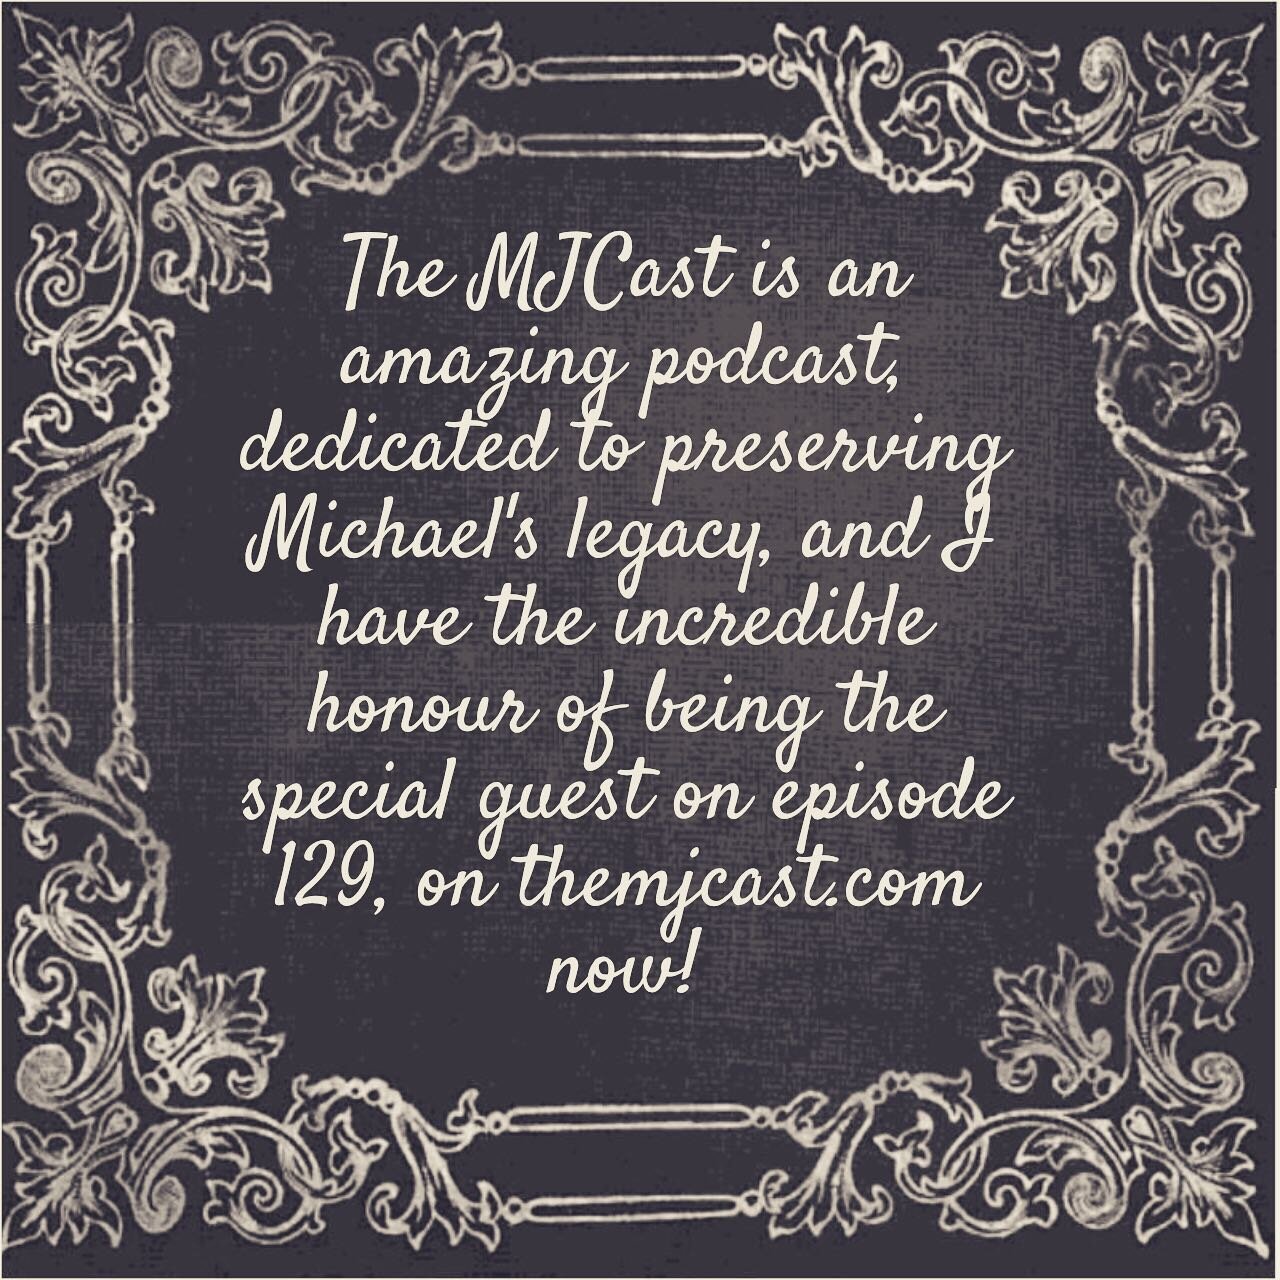 Thank you to @EliseCapron for hosting the episode and for @Talin613 for joining me for the interview, you are both beautiful, sweet souls. You can listen to our two-hour interview on episode 129 of @themjcast now, at the MJCast.com - just visit my we